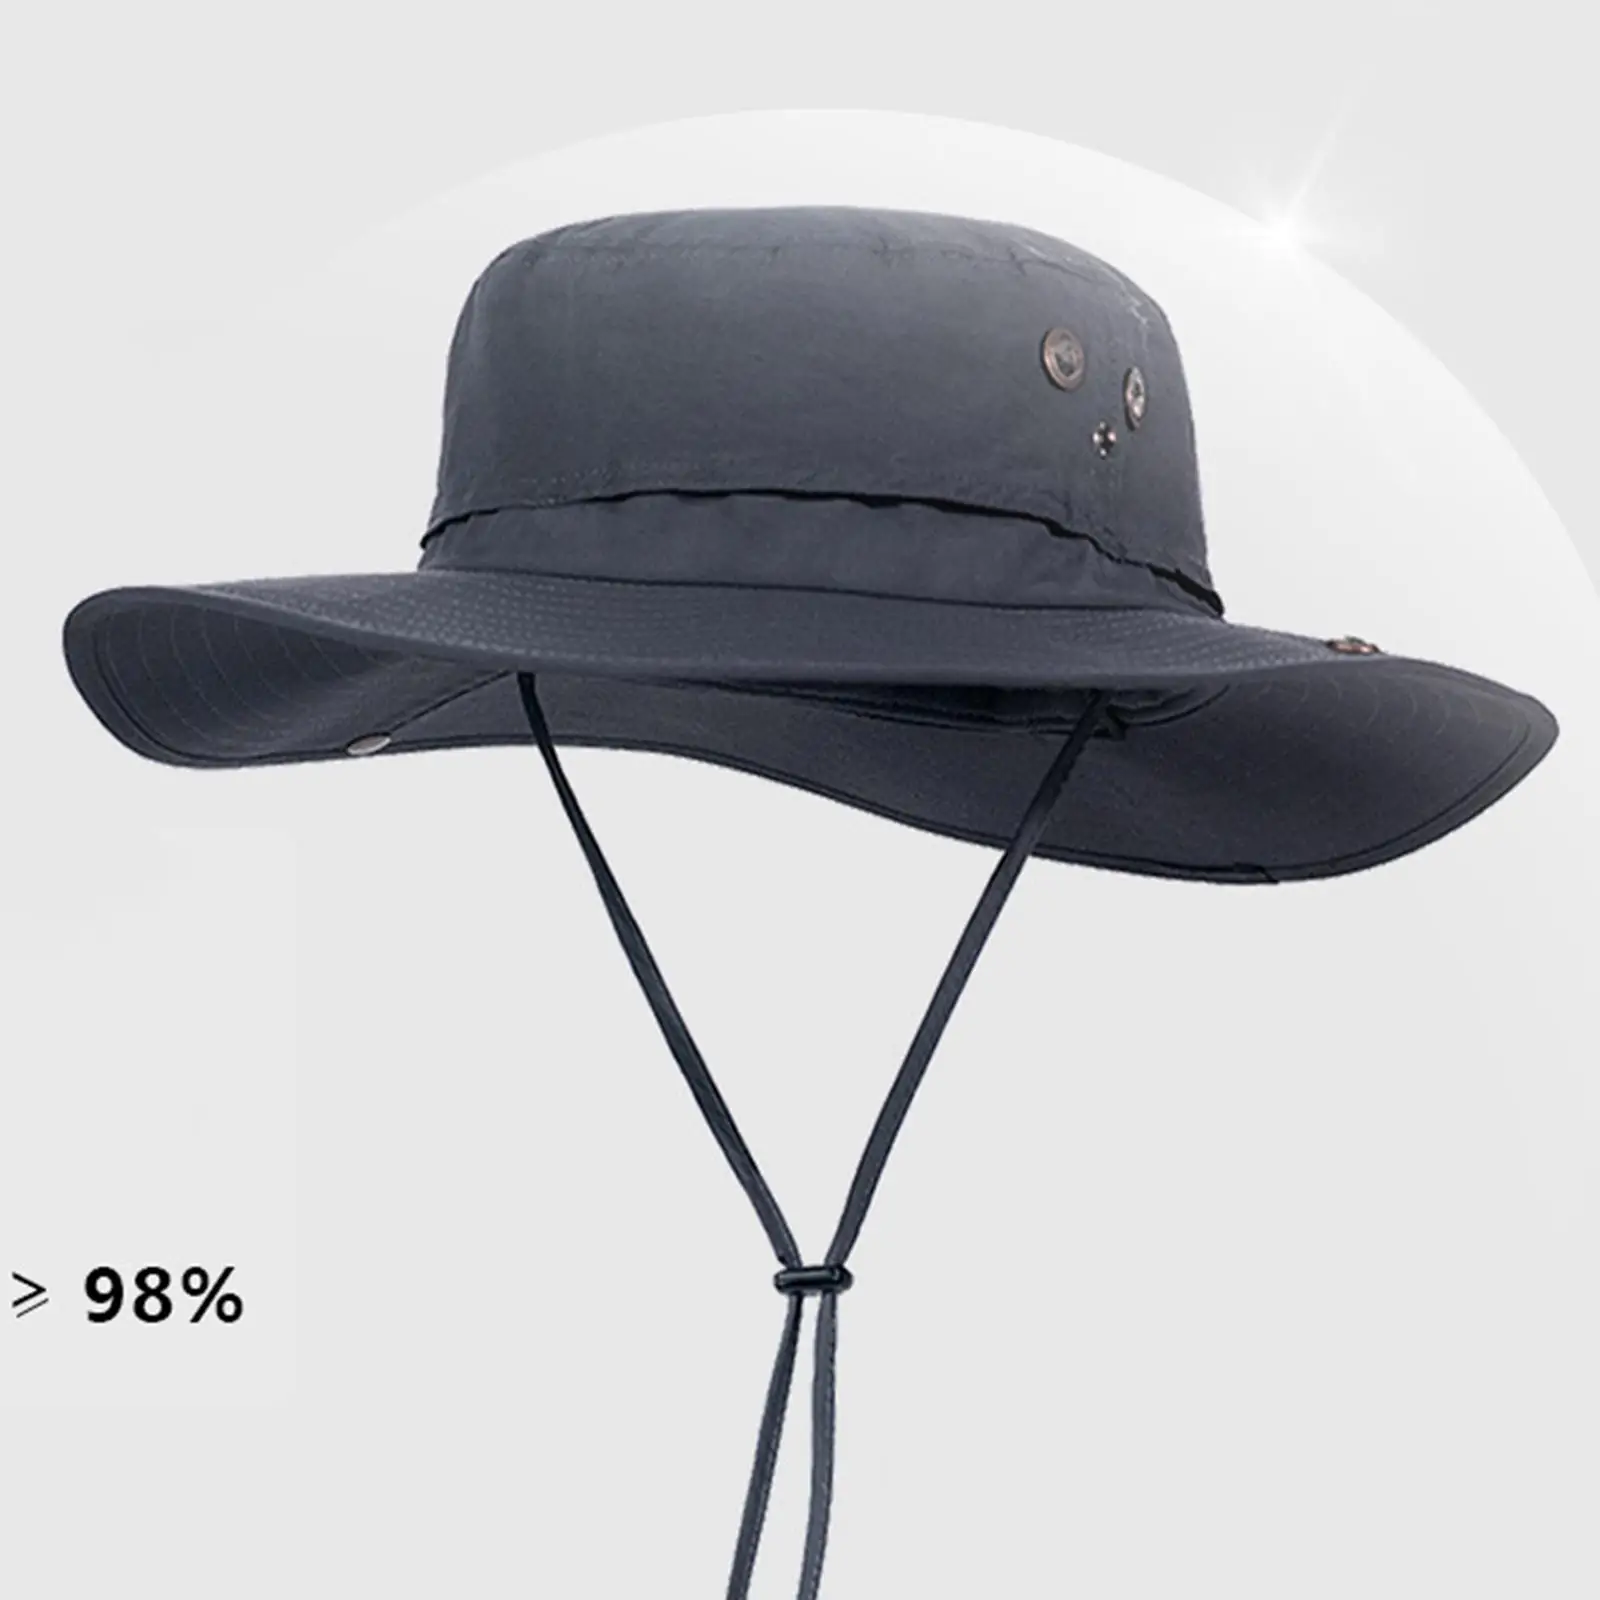 Sun Protection Hat Waterproof Breathable with Strings Wide Brim Bucket Sunhat for Fishing Hat Outdoor Travel Garden Women Men